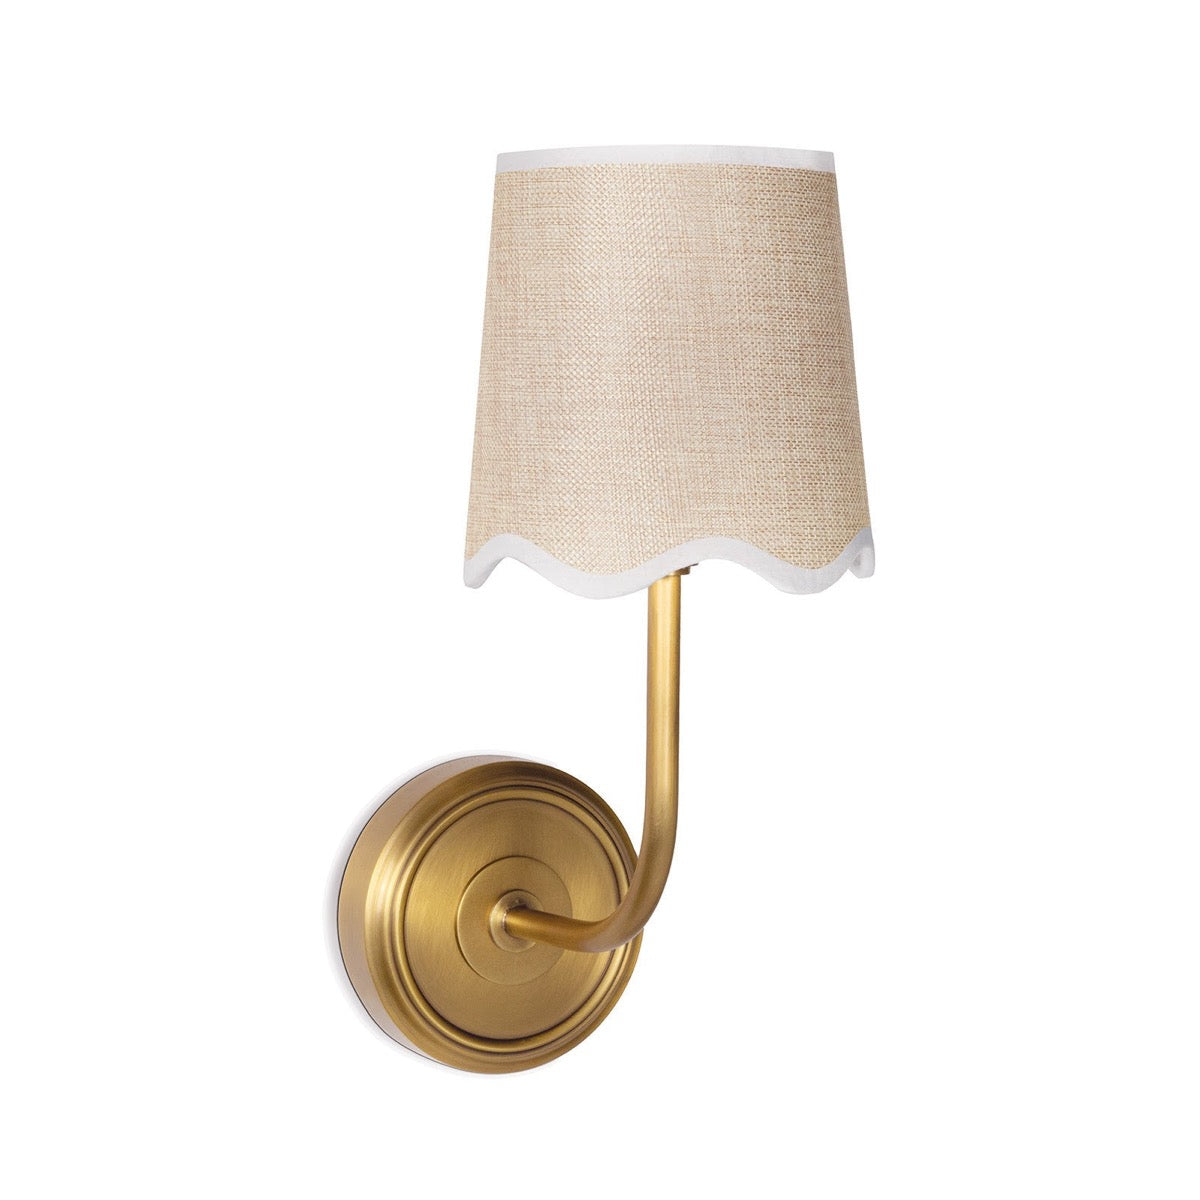 Ariel Sconce Natural Brass. Right angle view.